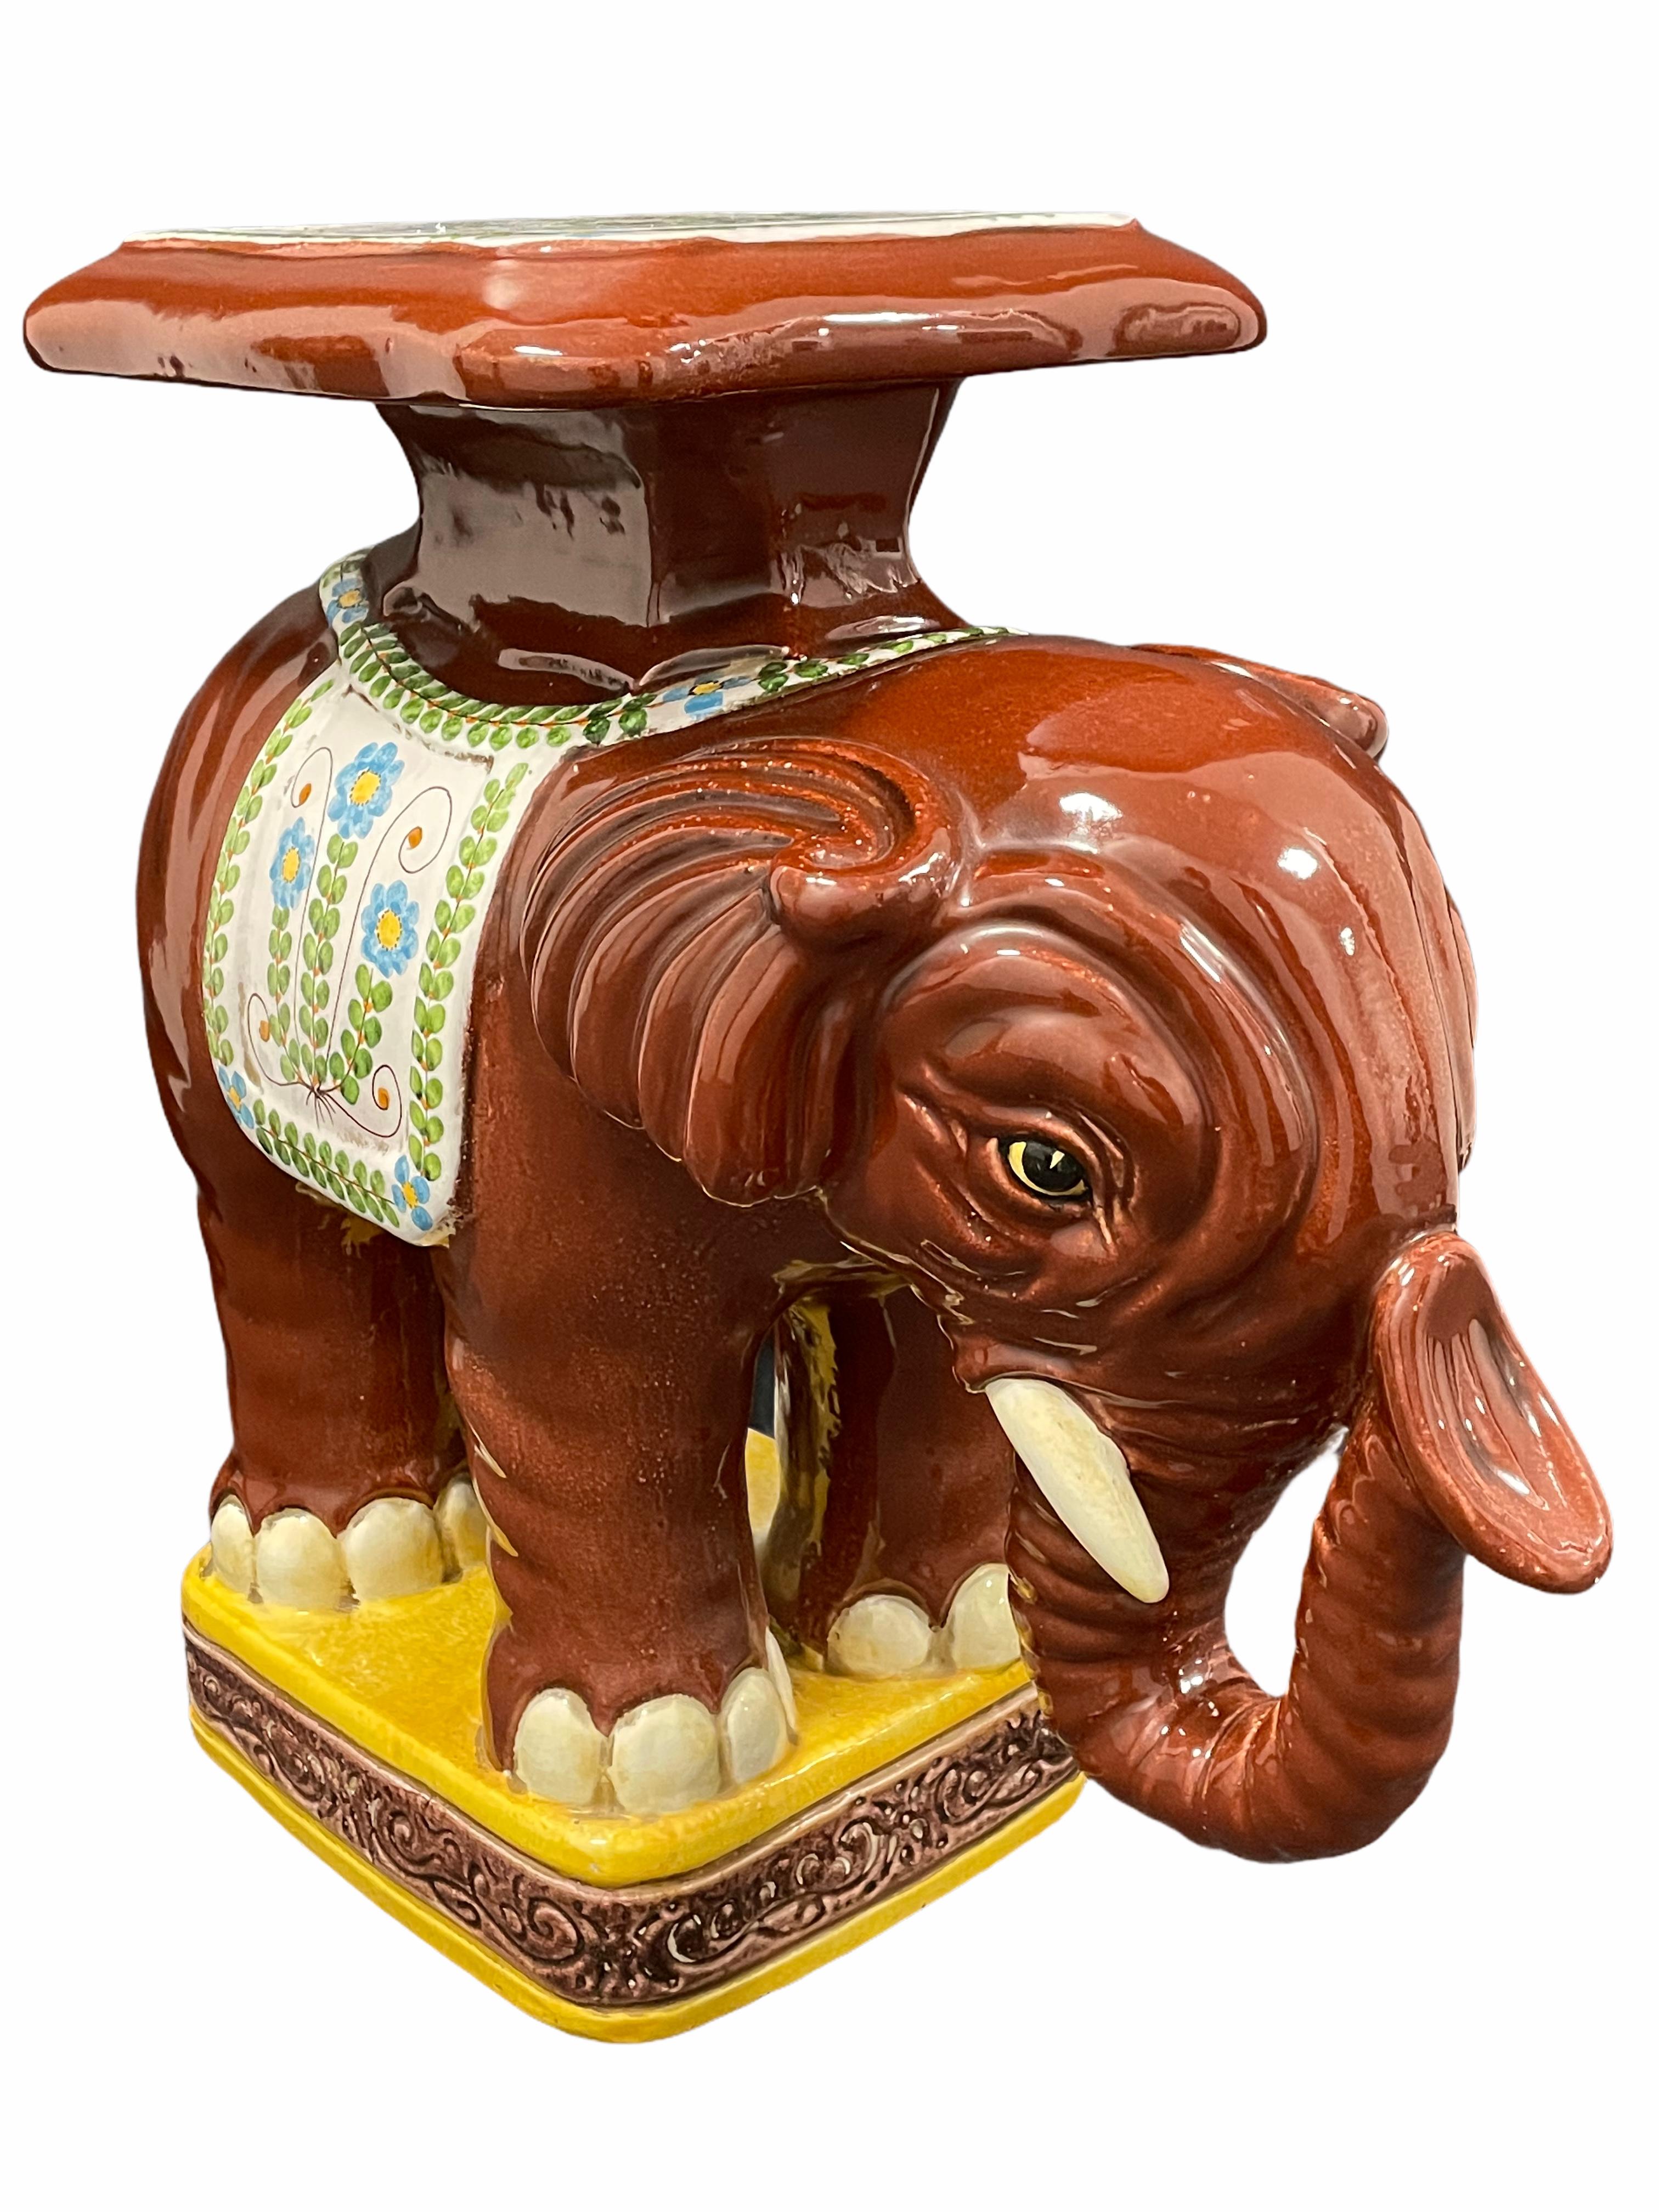 Hand-Crafted Hollywood Regency Italian Terracotta Elephant Garden Stool Plant Stand or Seat For Sale